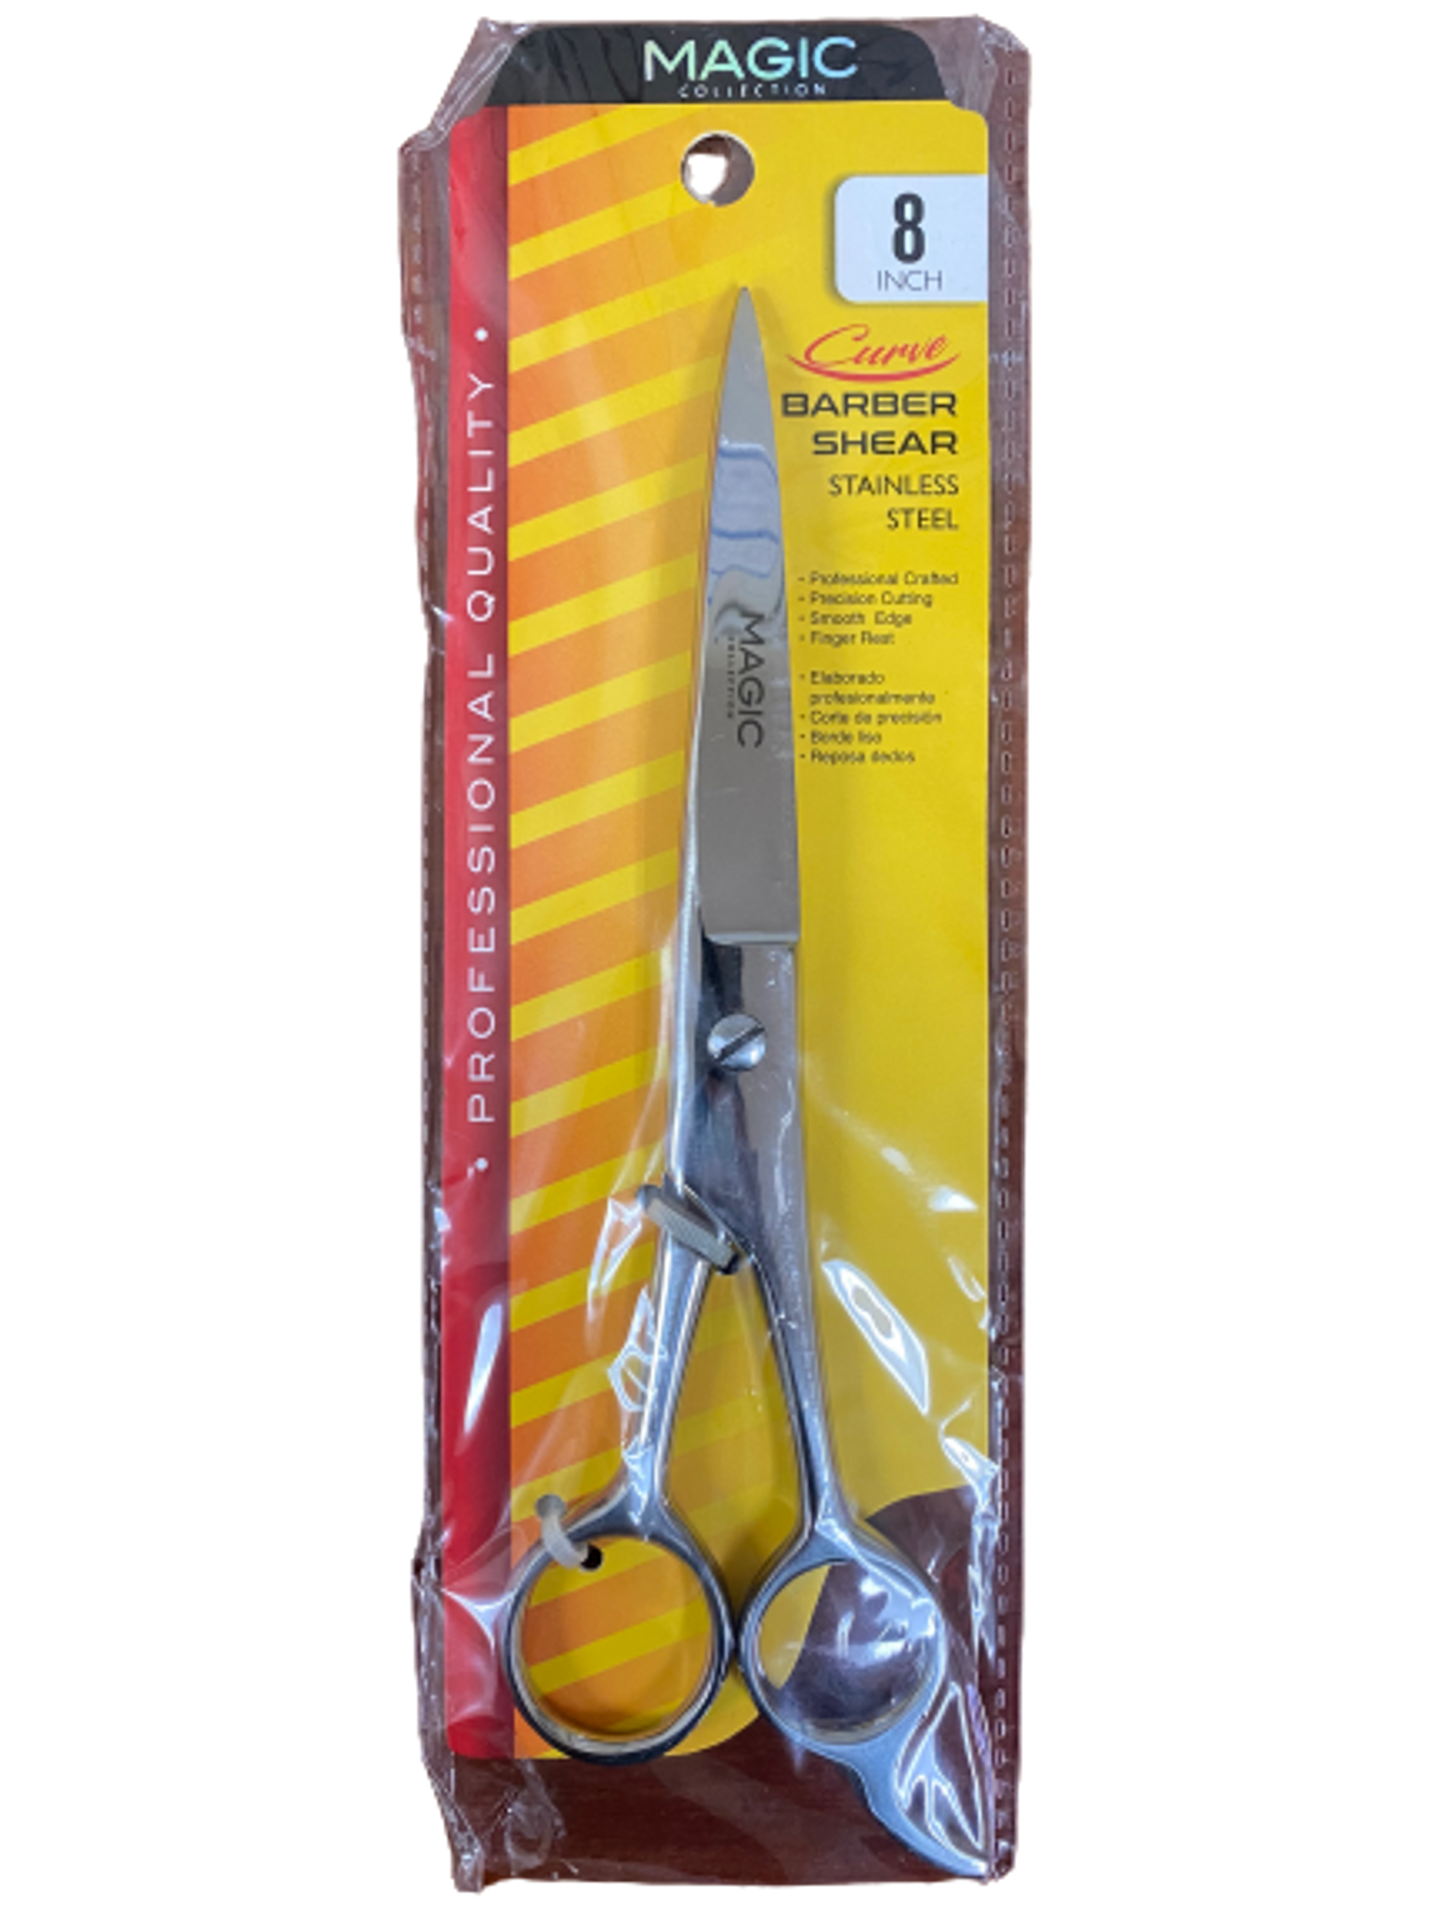 Magic Collection Professional Curve Stainless Steel Barber Shear